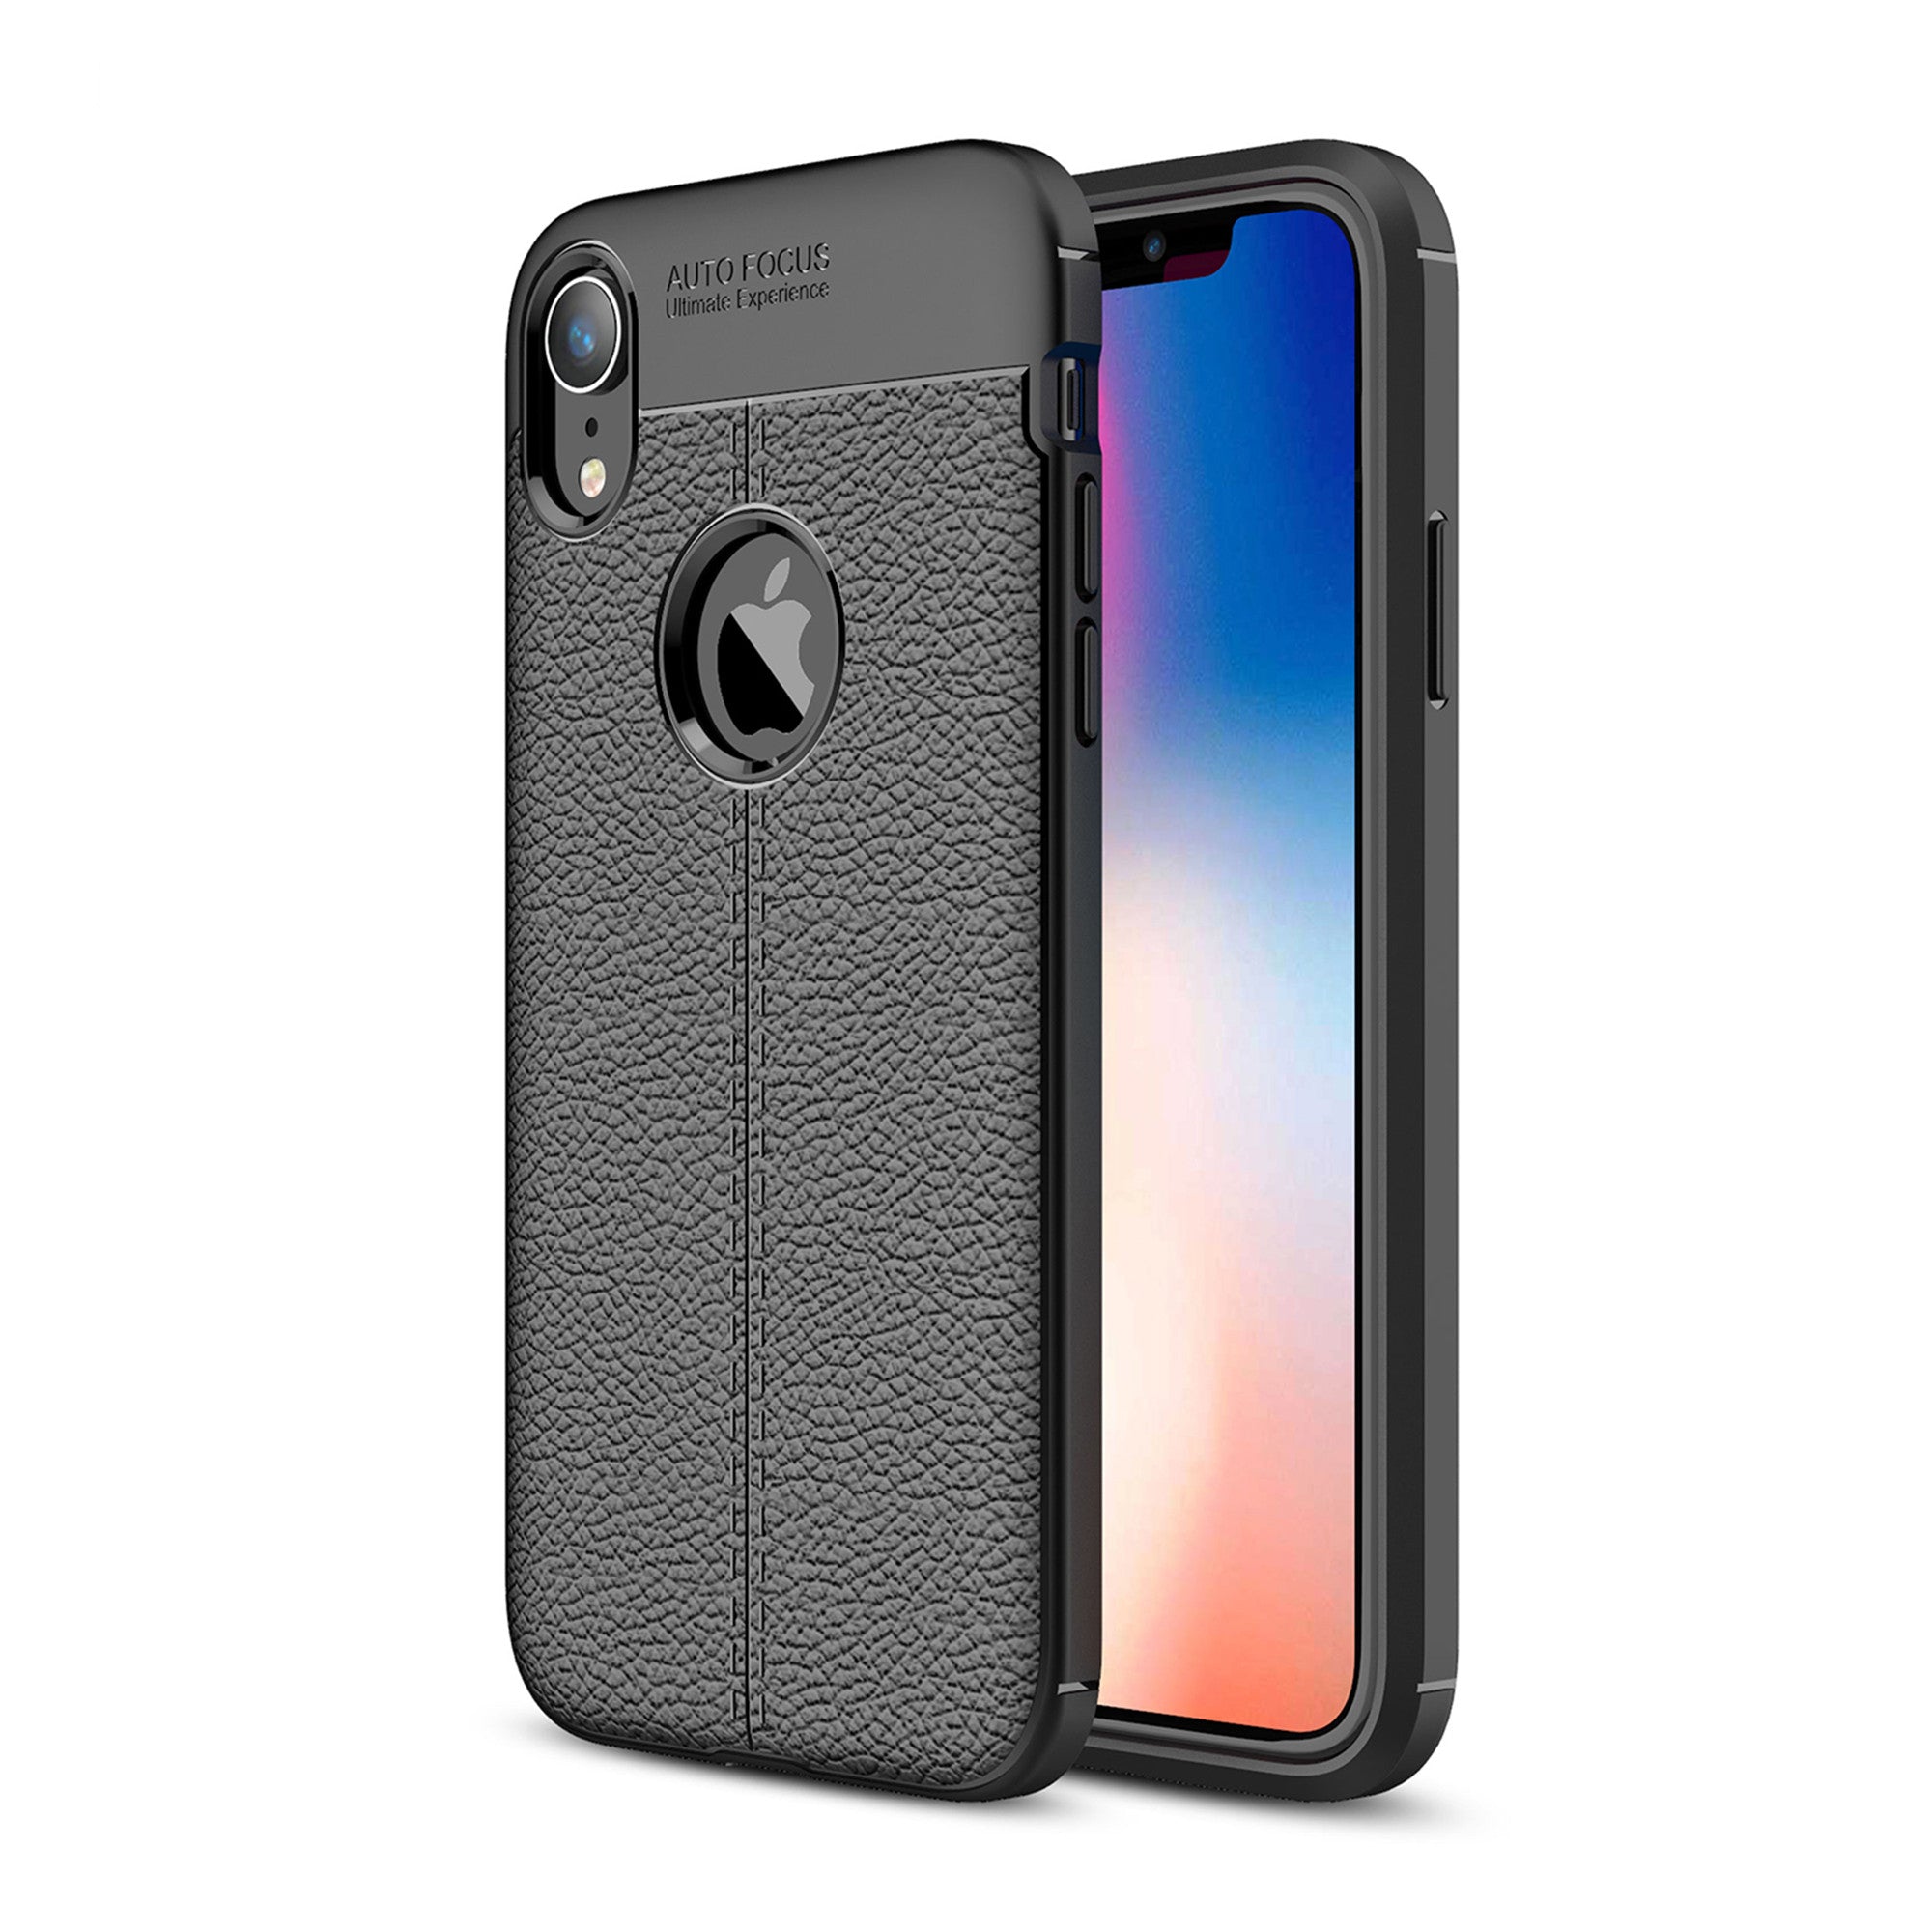 Luvvitt Case for iPhone XR TPU Flexible Protection with 6.1" Screen 2018 - Black